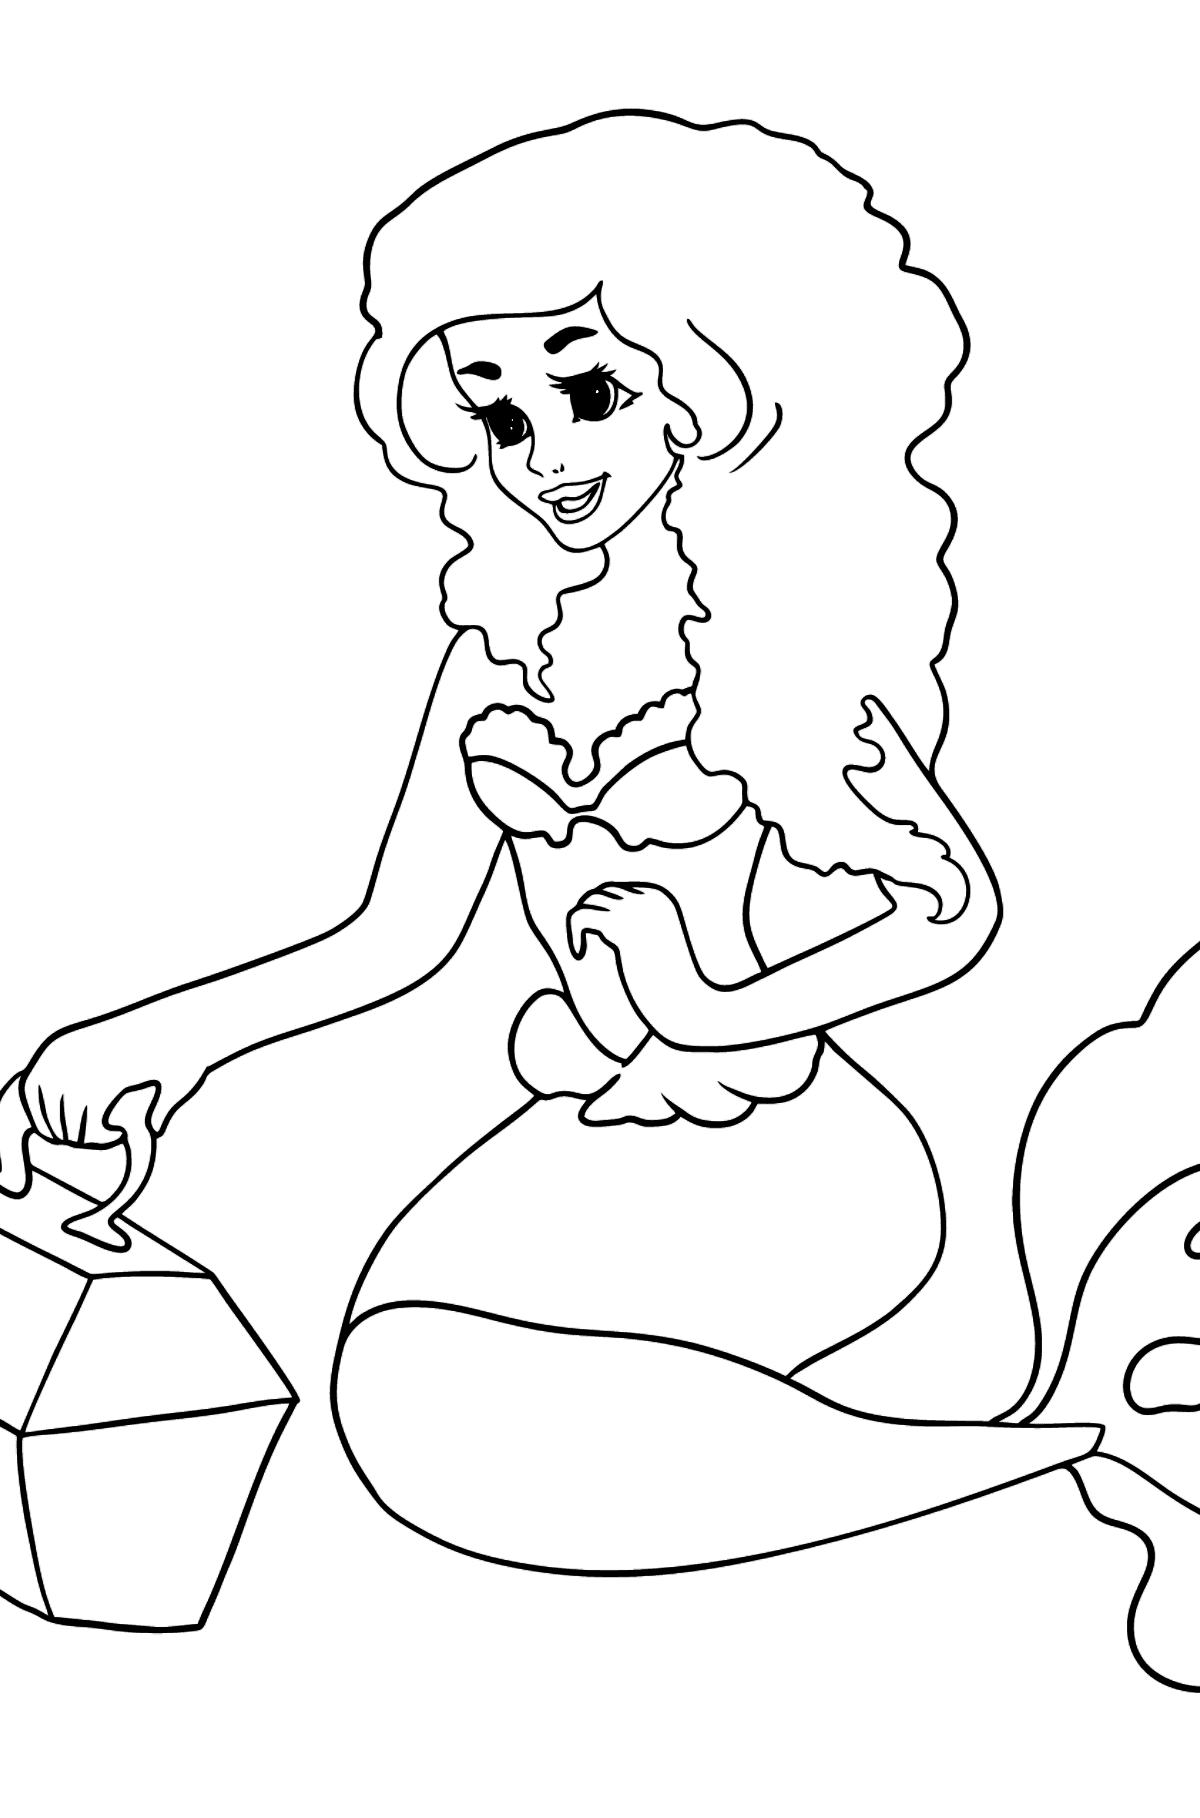 Coloring Page Mermaid and Chest - Coloring Pages for Kids